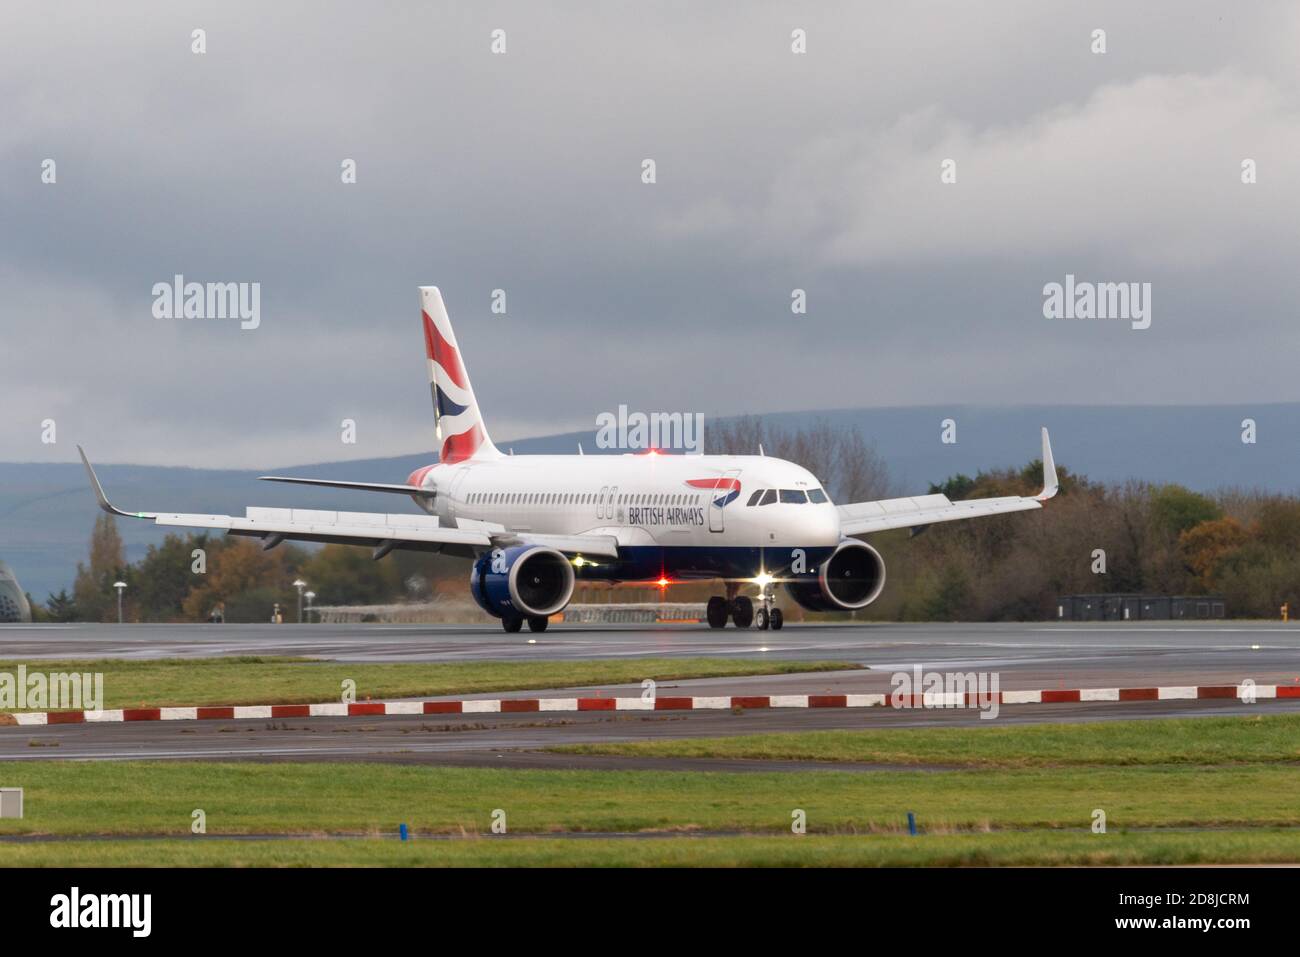 MANCHESTER, UK 30 OCTOBER 2020 - British Airways Airbus A320-251N flight BA1396 from London Heathrow lands at Manchester Airport in the rain. Stock Photo